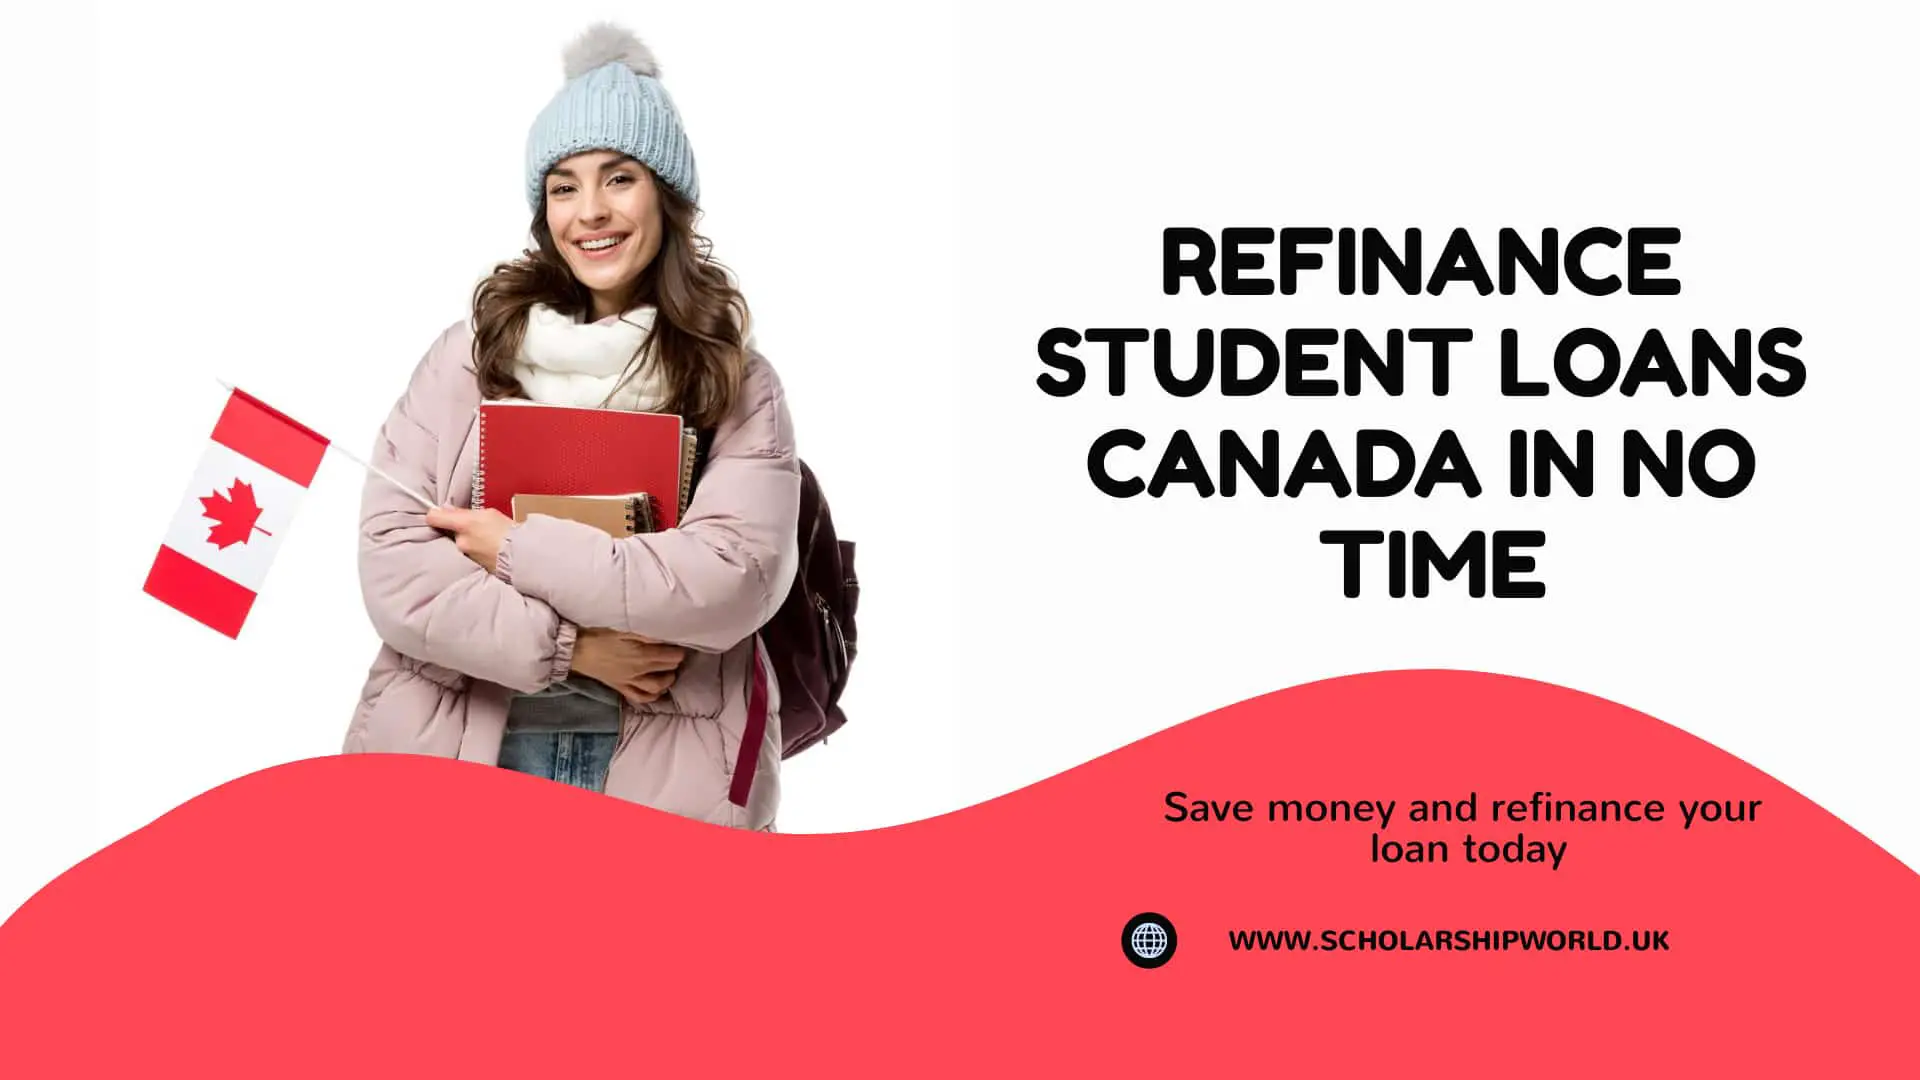 Refinance Student Loans Canada in No Time 2022